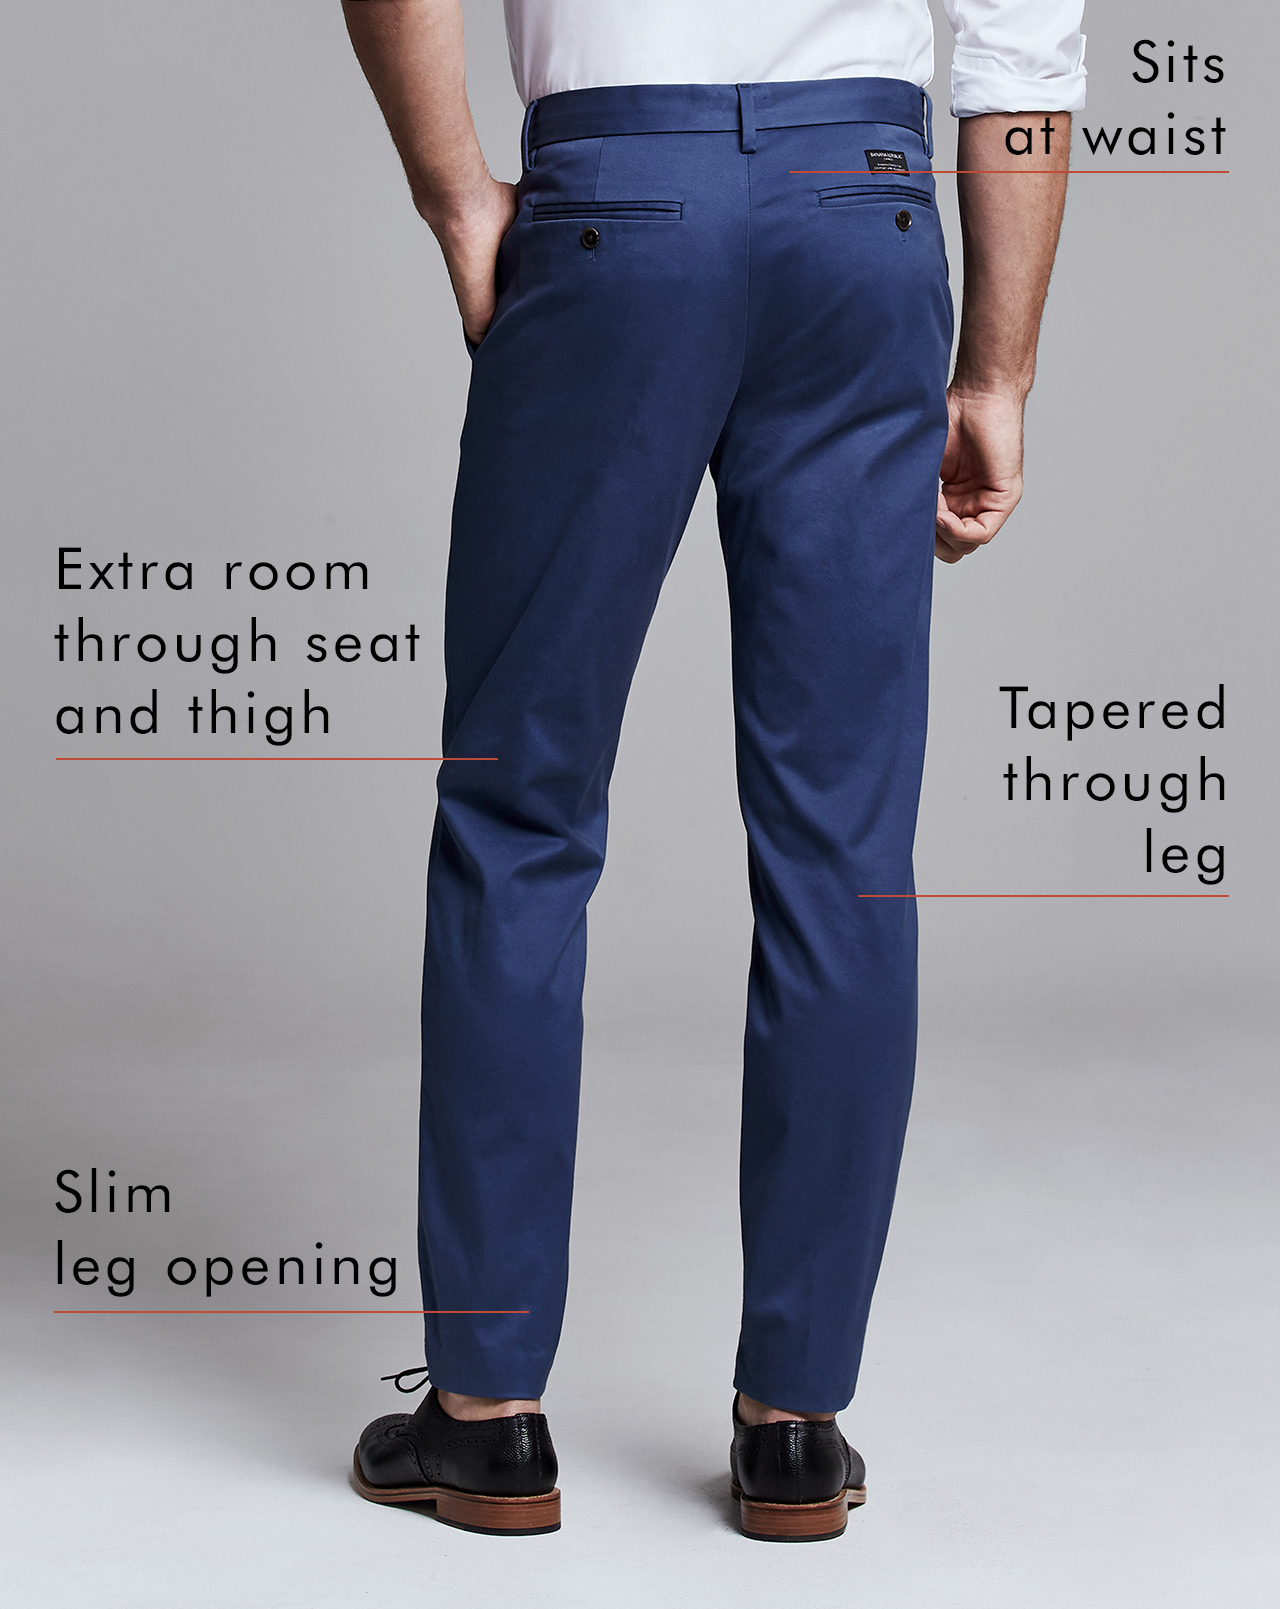 Fit Guide Men's Chinos - Mason